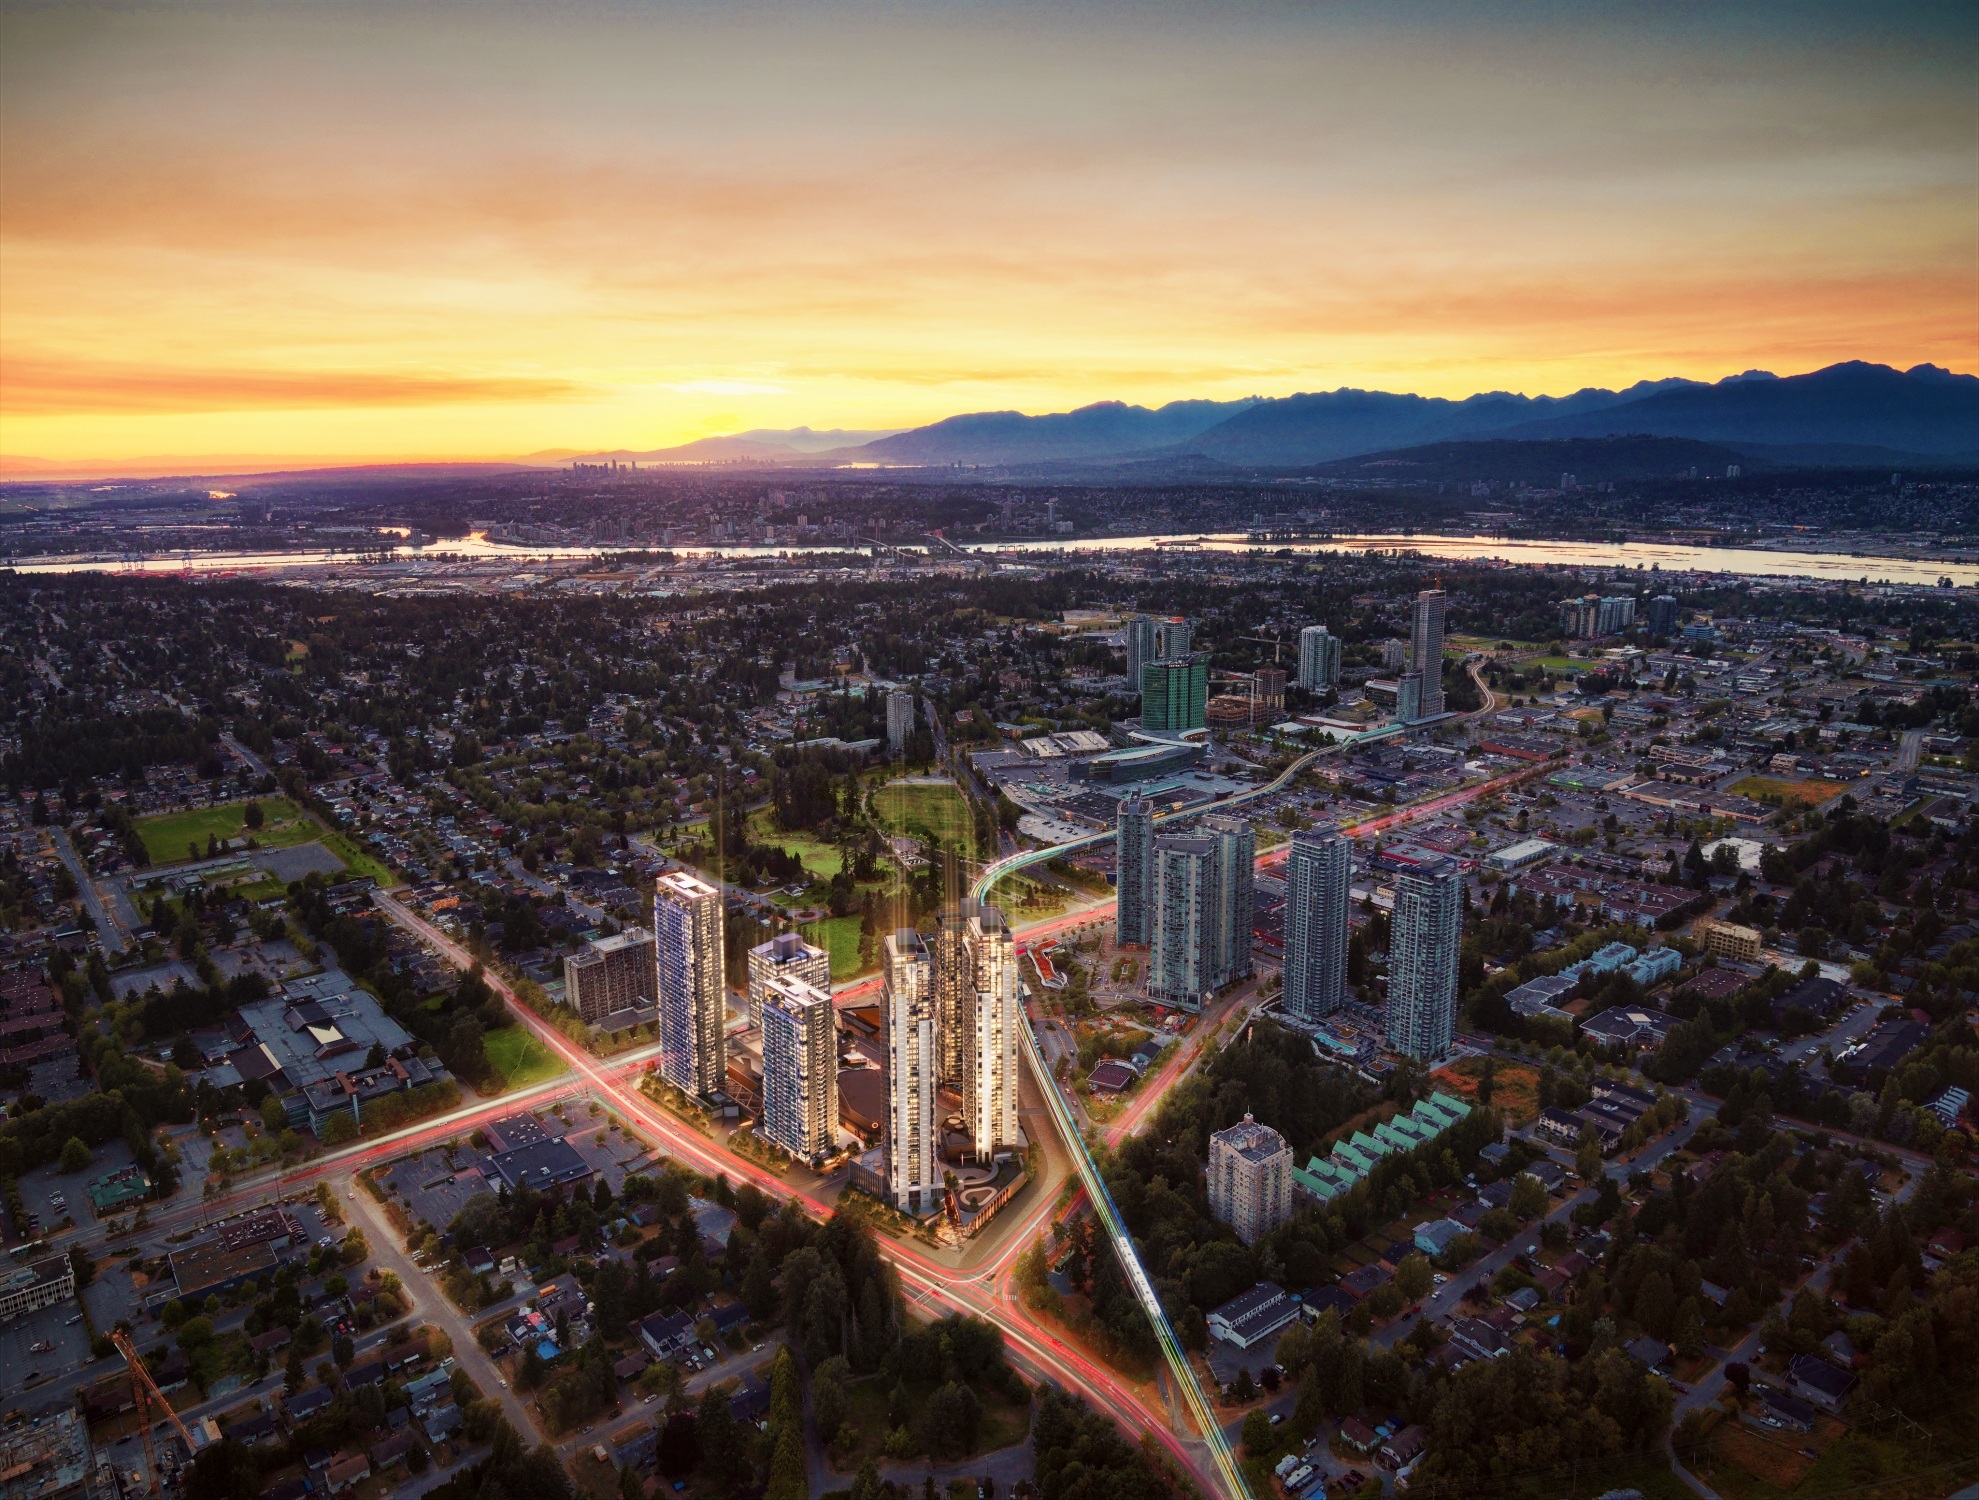 Upon full completion, King George Hub will comprise of 370,000 square feet of office; 140,000 square feet of retail; 1,624 condo homes; and 771 rental homes – all within steps of rapid transit.